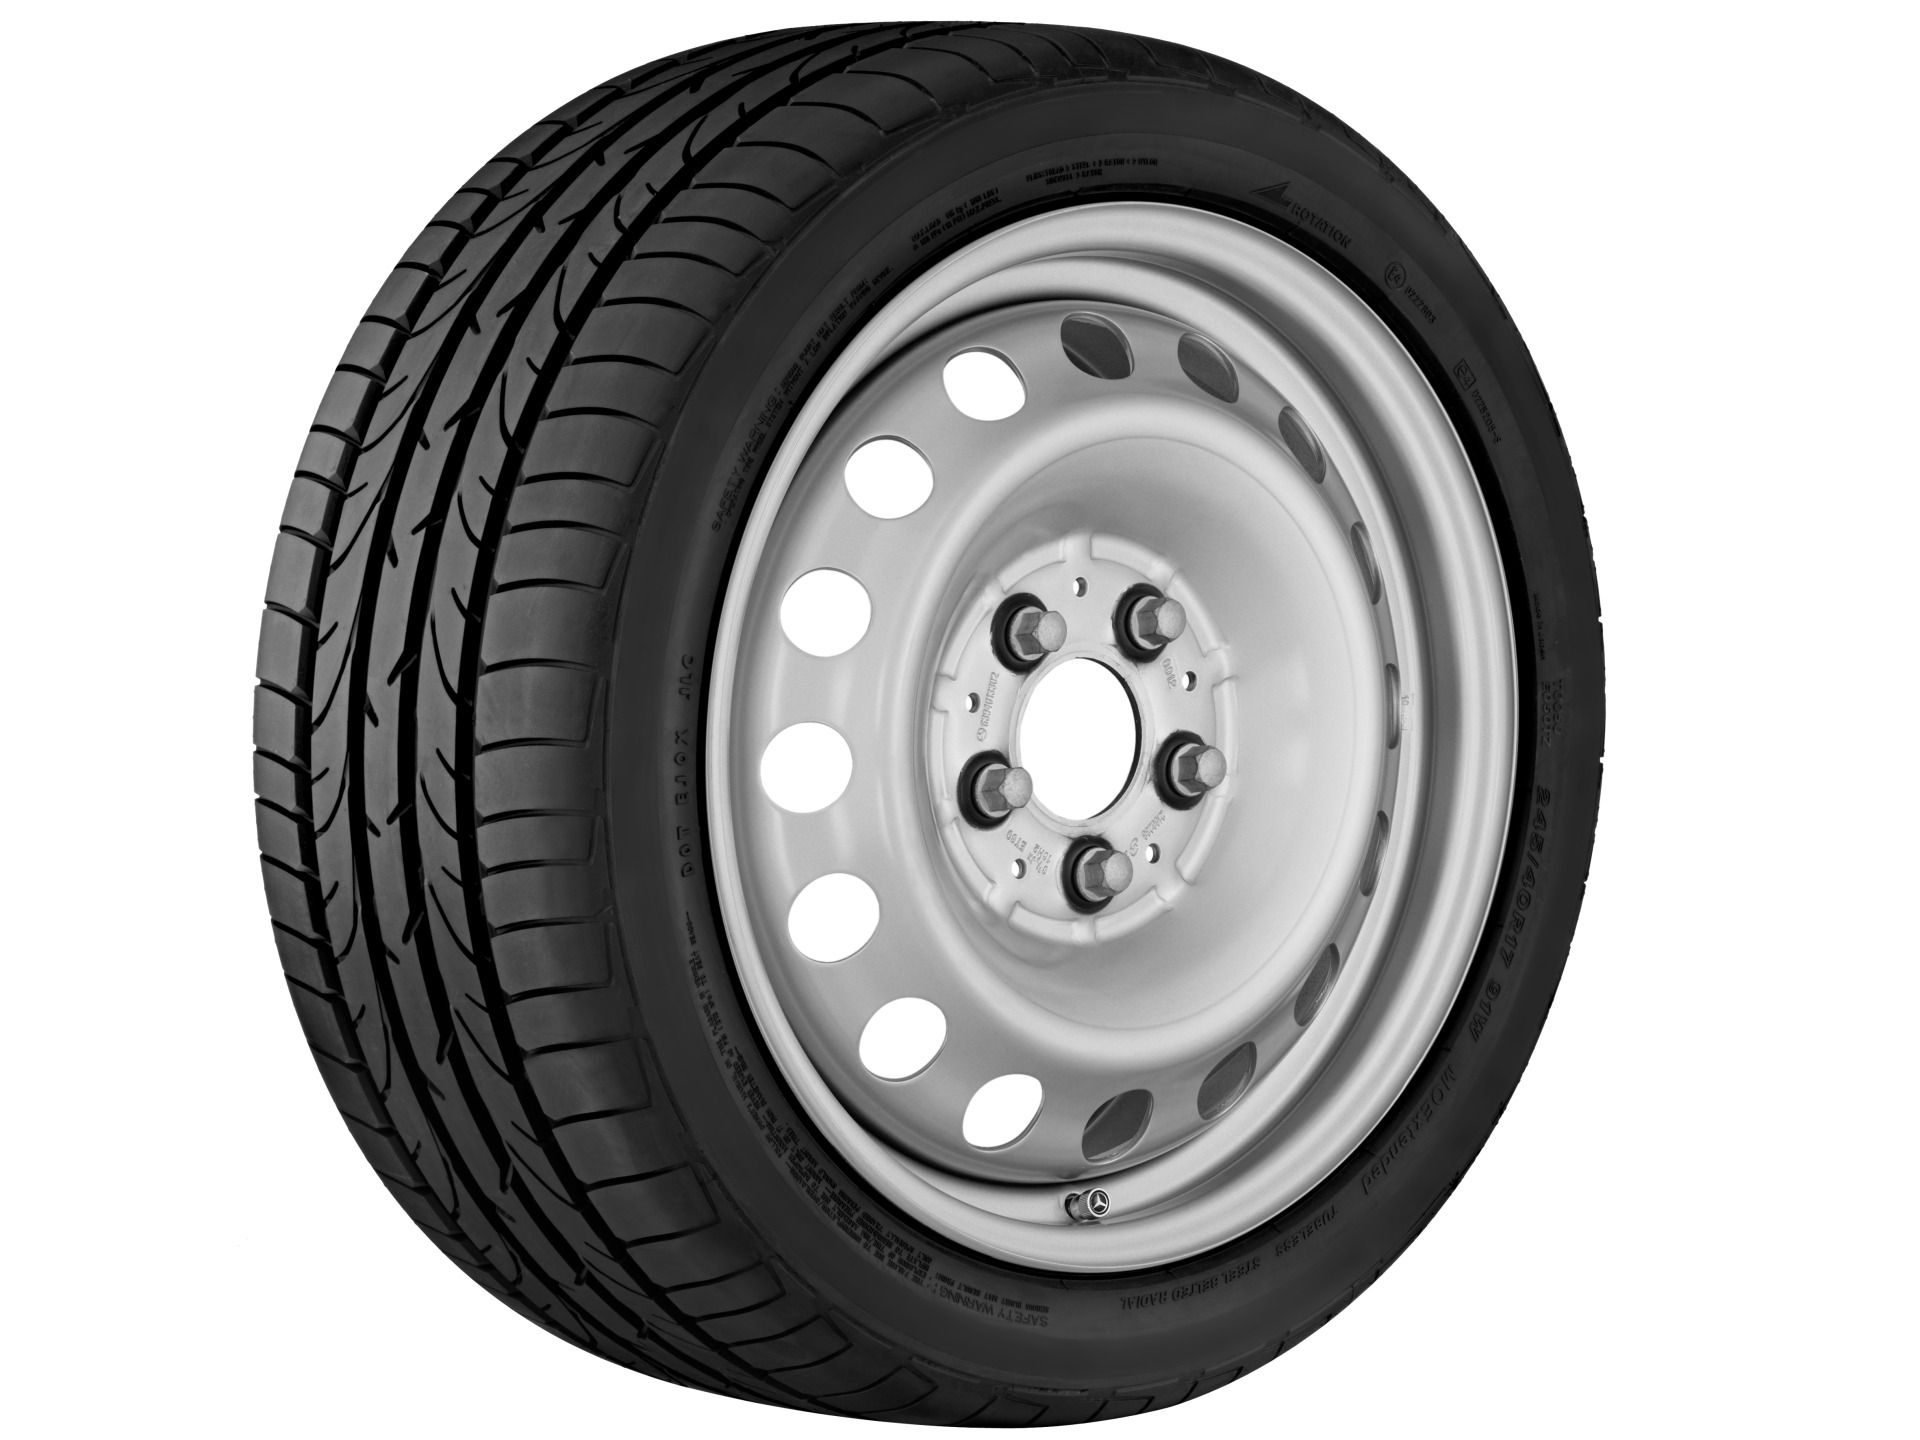 Stahl-Rad Silber, Continental, ContiVanContact 200, 205/65 R16 107/105(103)T(H) C, Sommer, Q440271110300